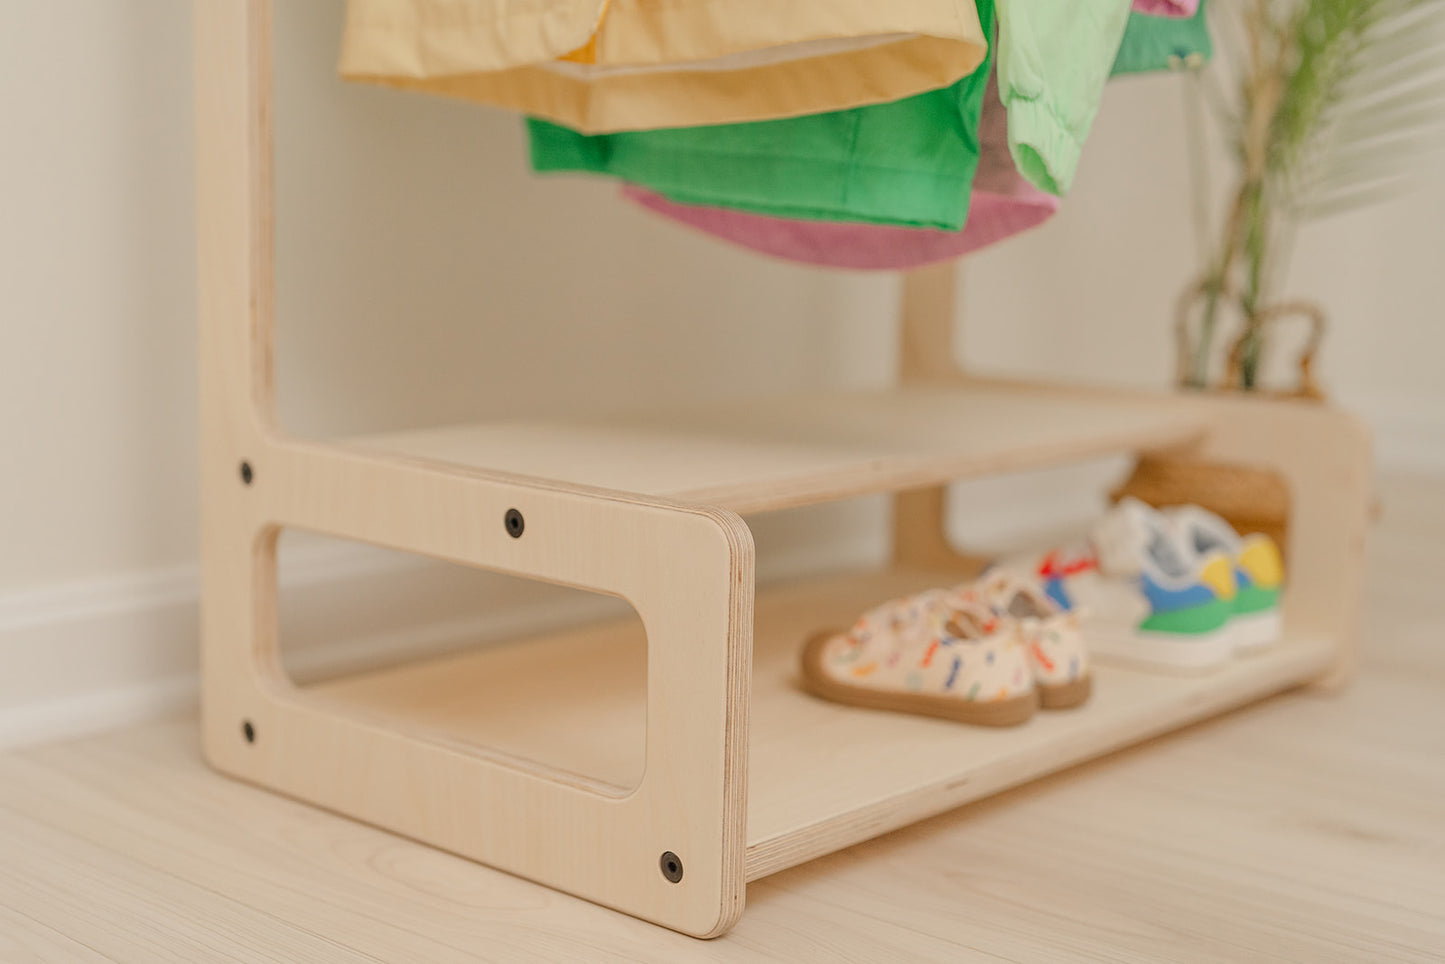 shelves of wooden child size clothing rack and the shelves holding multiple sneakers in a organized manner 